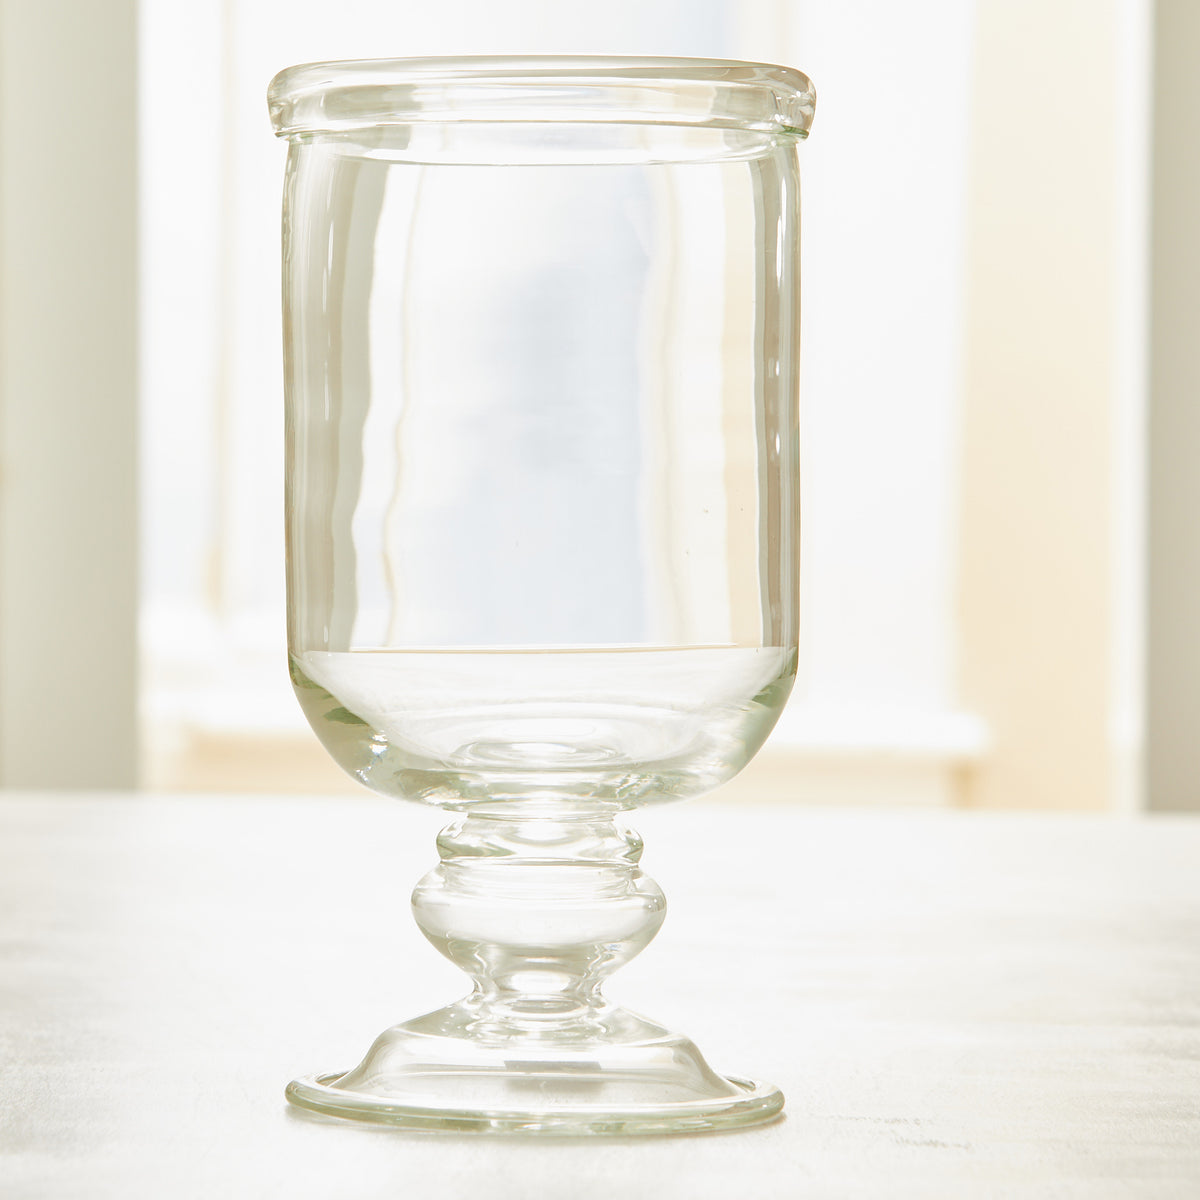 MOUTH-BLOWN FOOTED GLASS HURRICANE